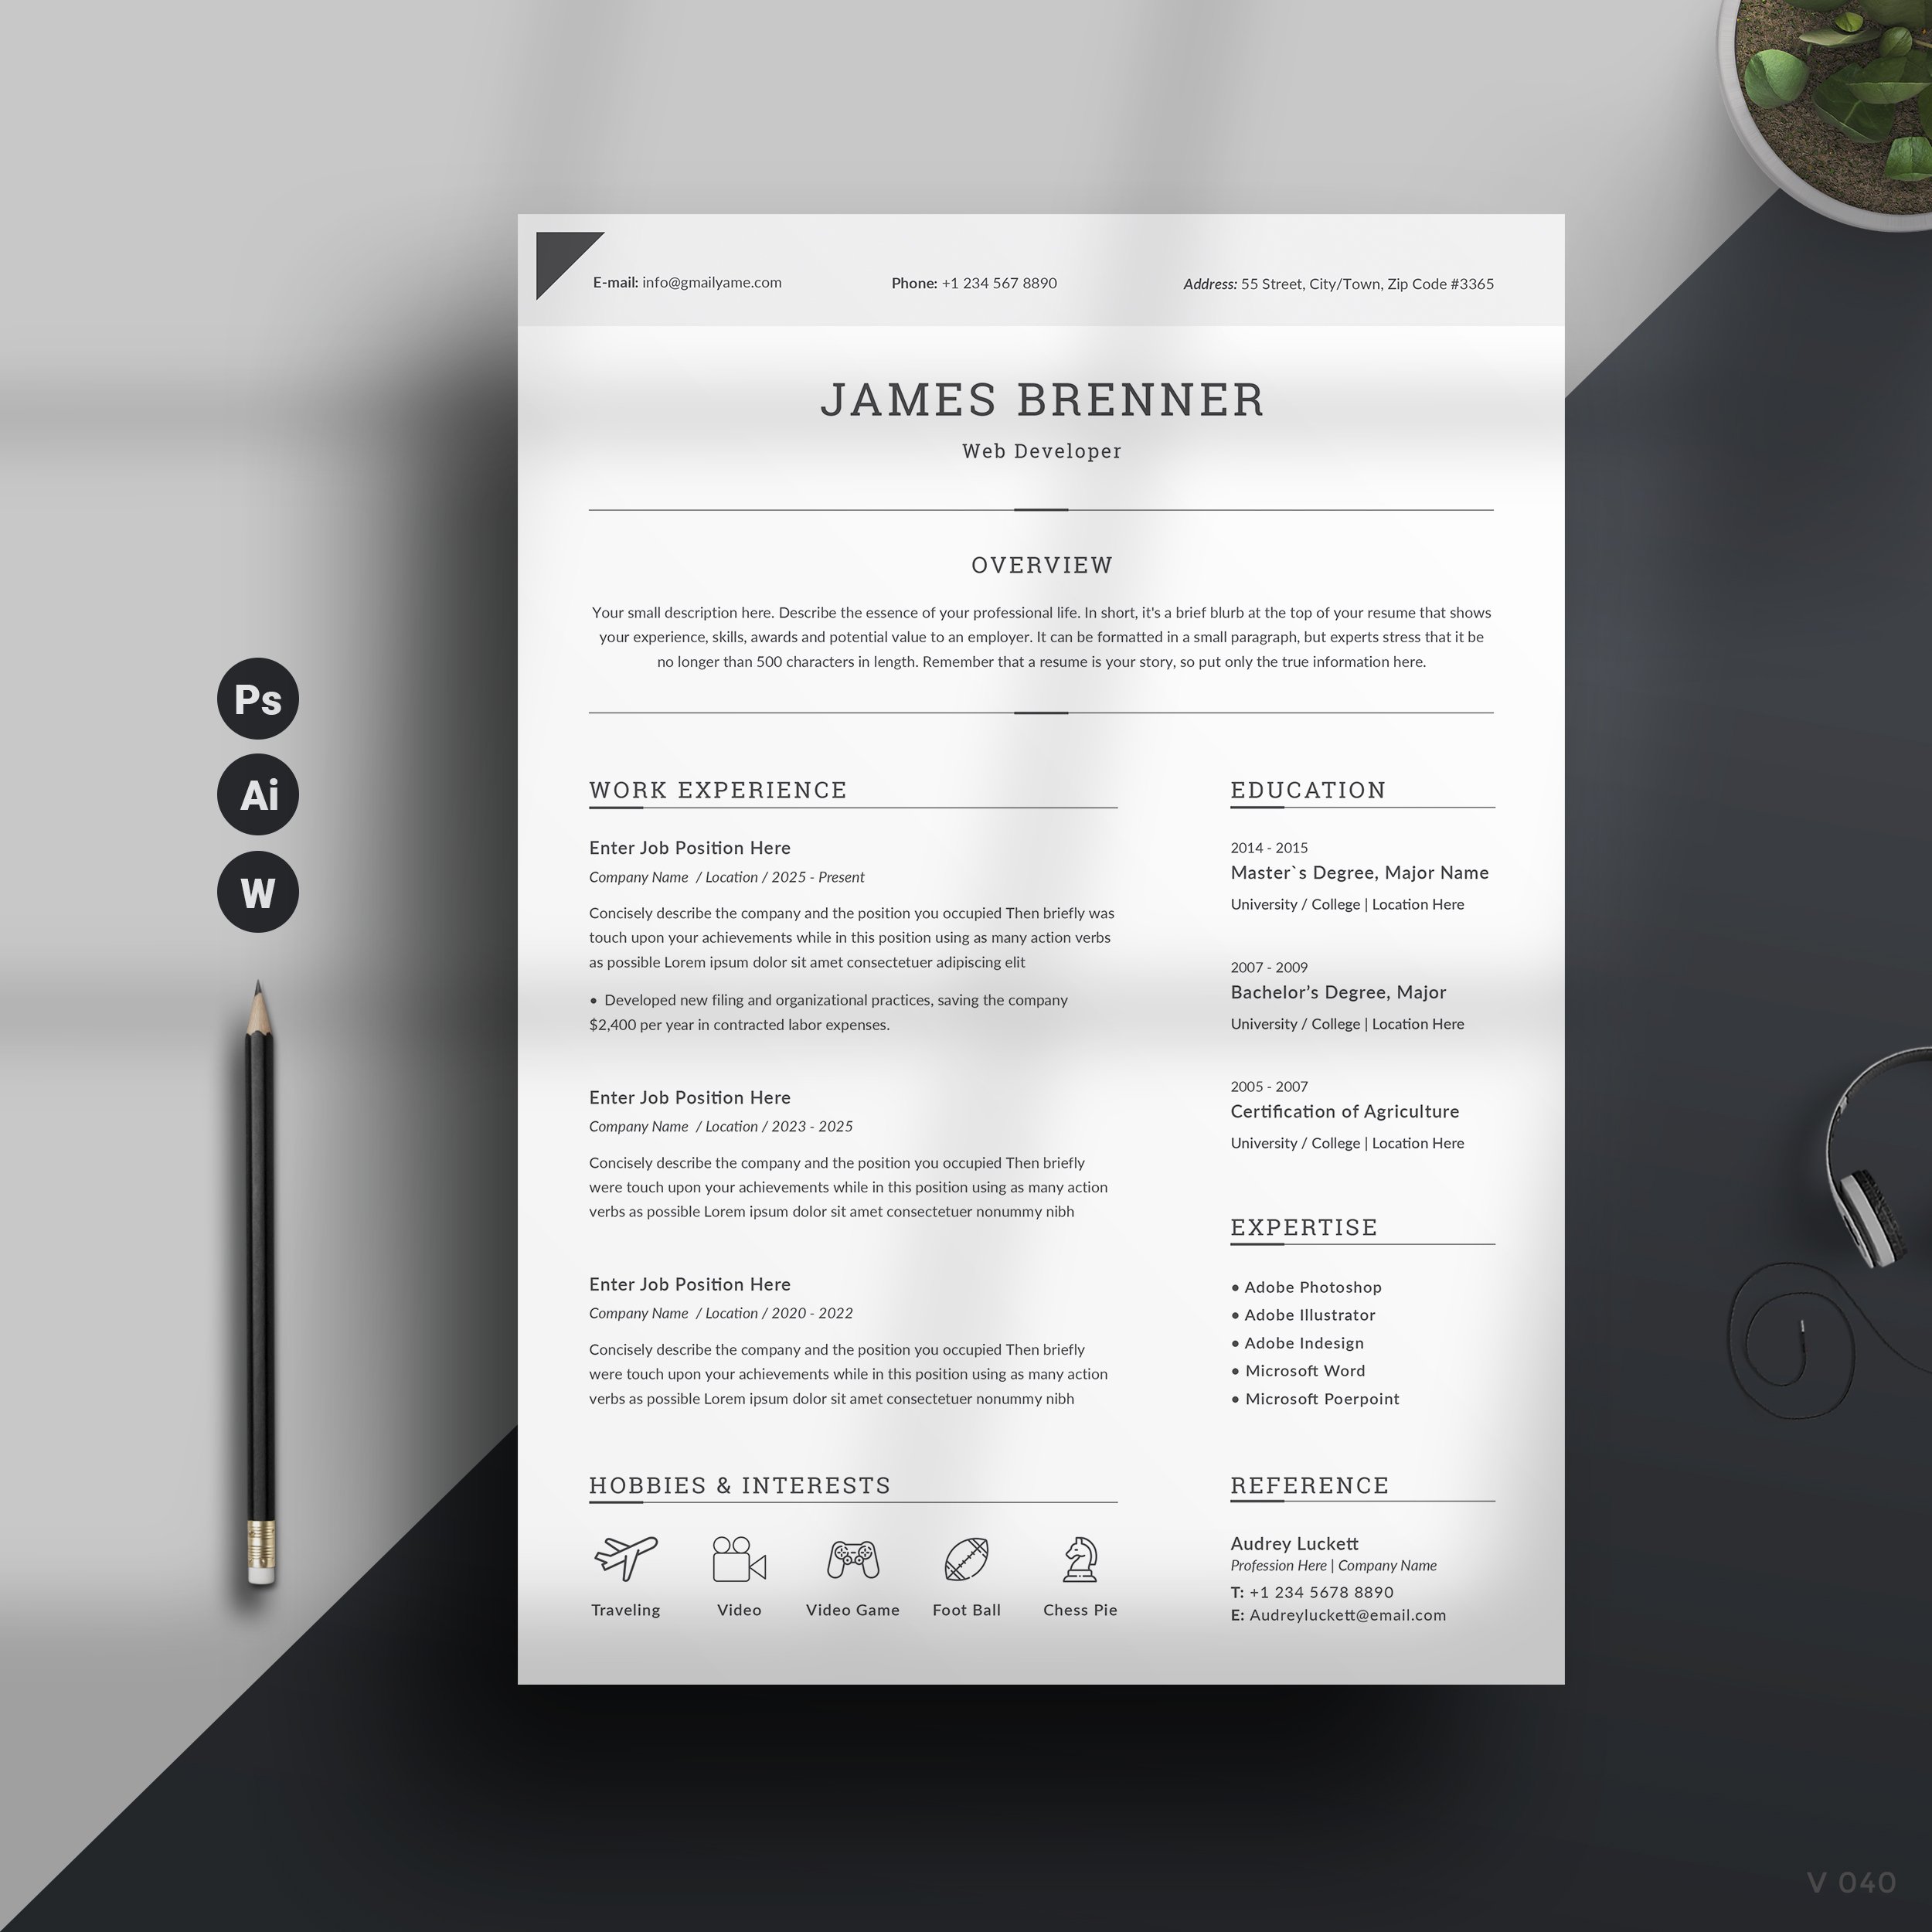 Clean and professional resume template on a desk.